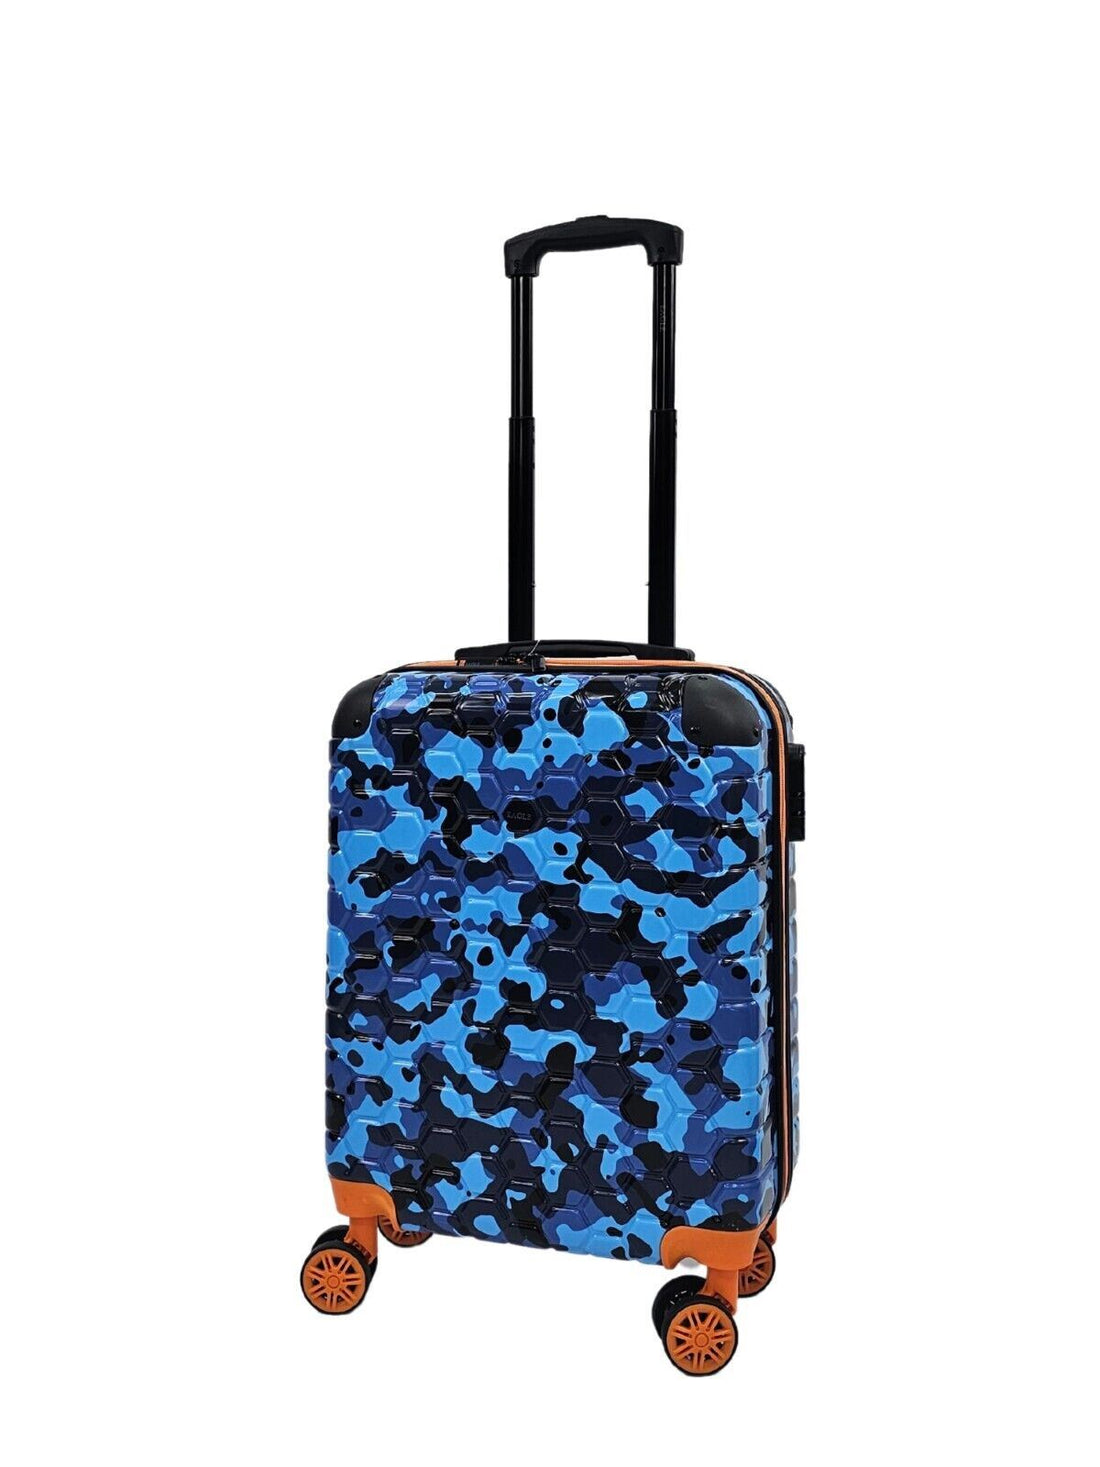 Hardshell Cabin Robust 8 Wheel ABS Luggage Travel Bag - Upperclass Fashions 